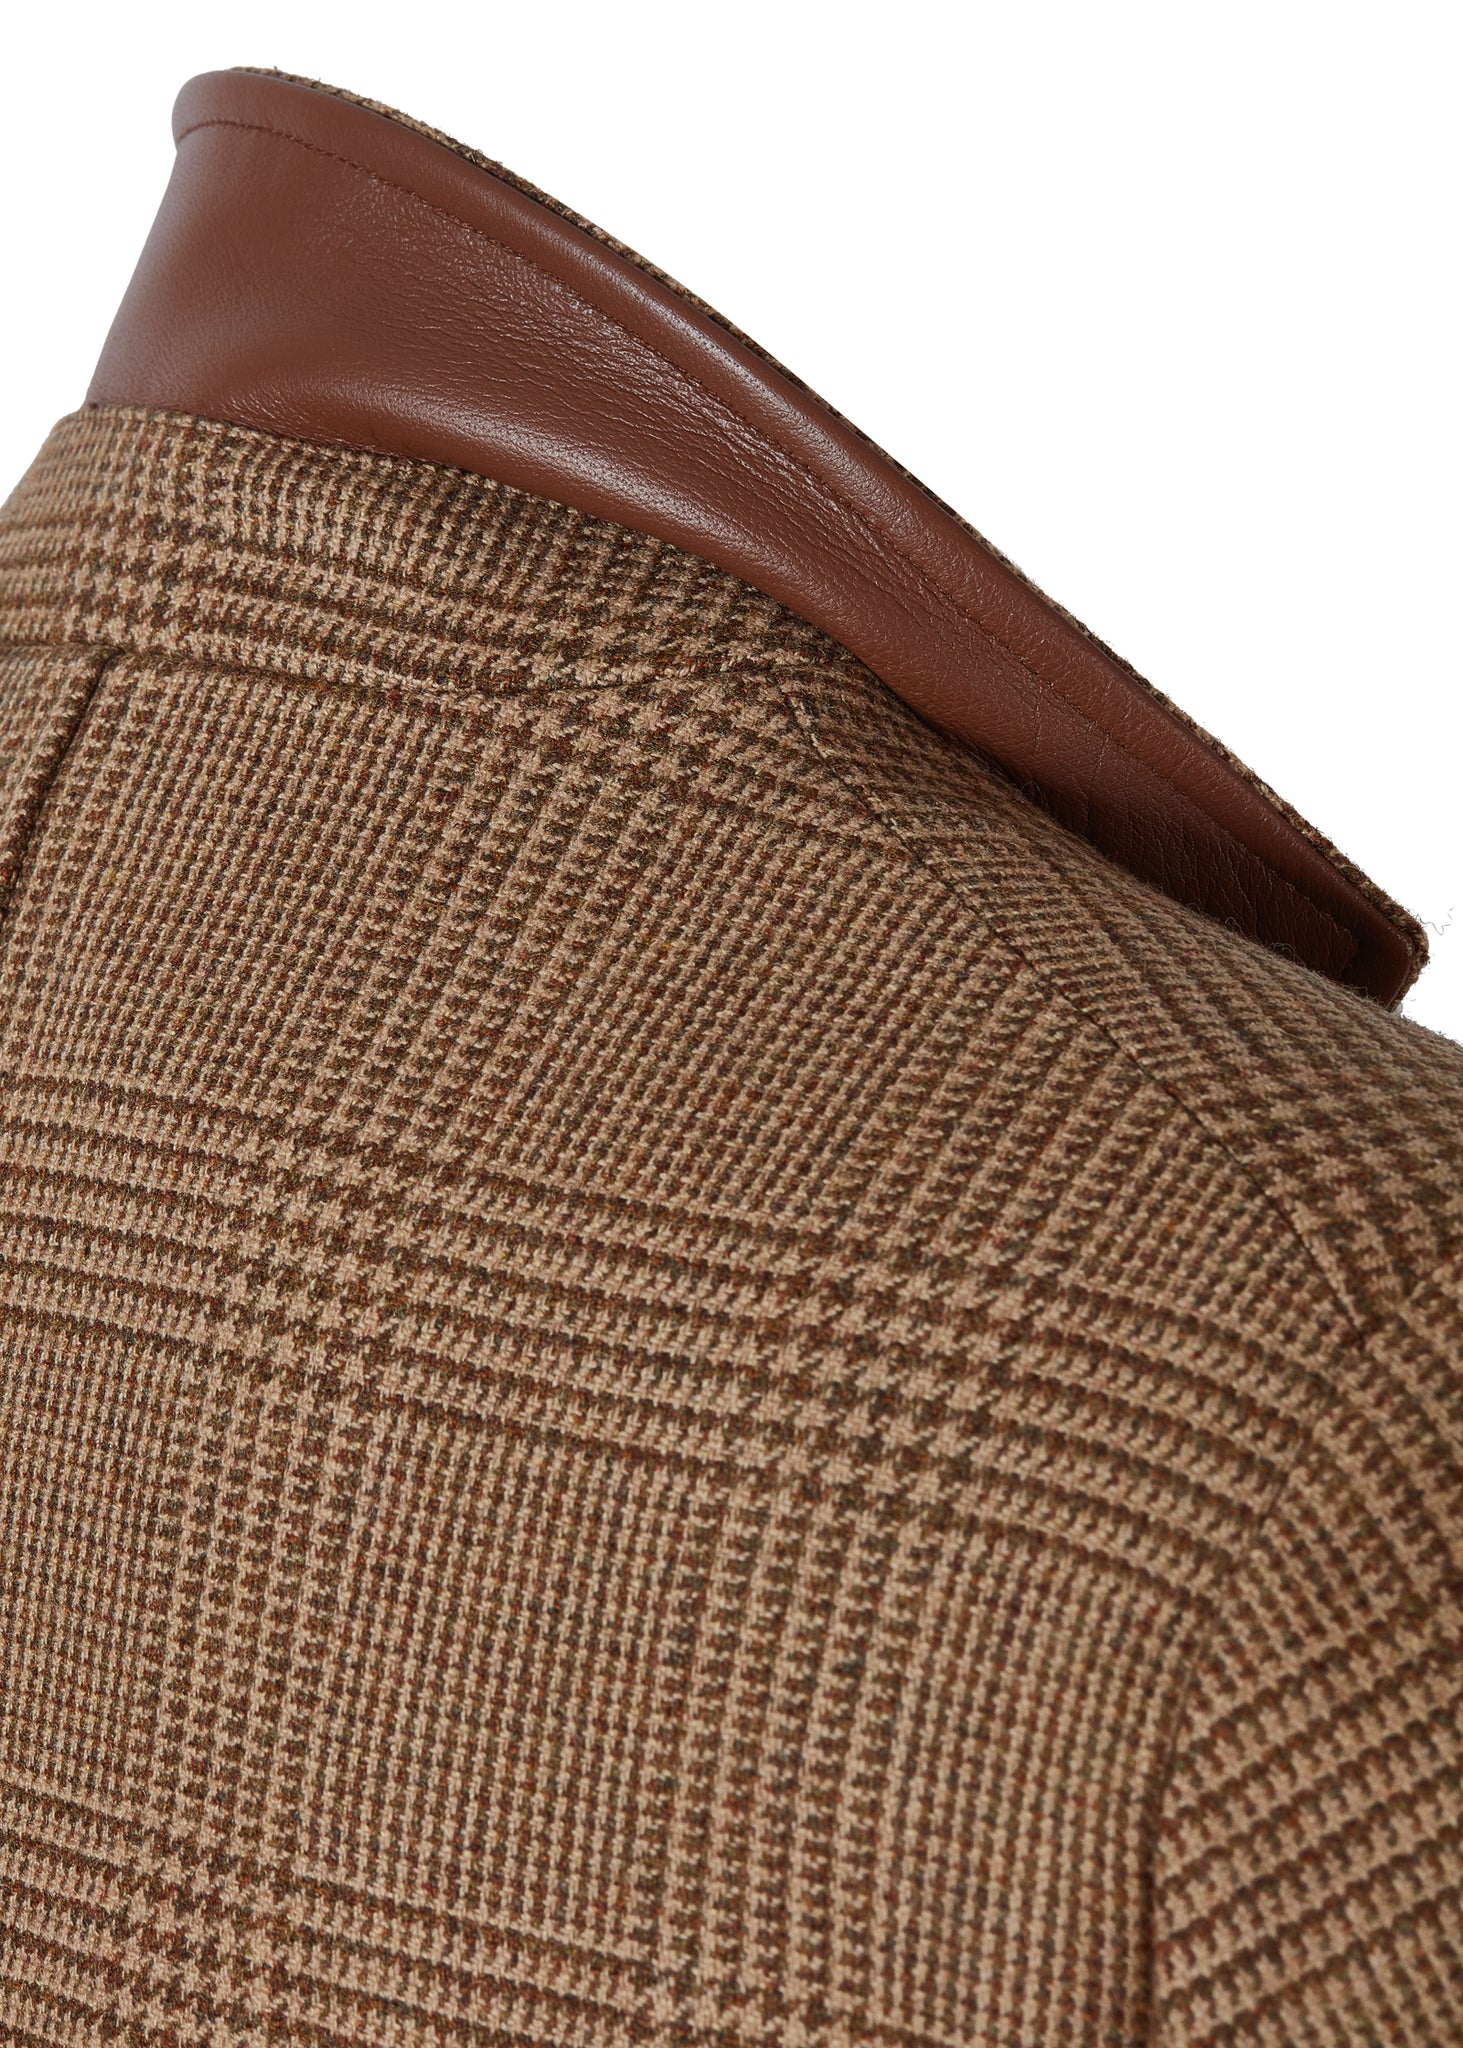 Tawny brown tweed mens coat with collar popped to show brown leather under collar